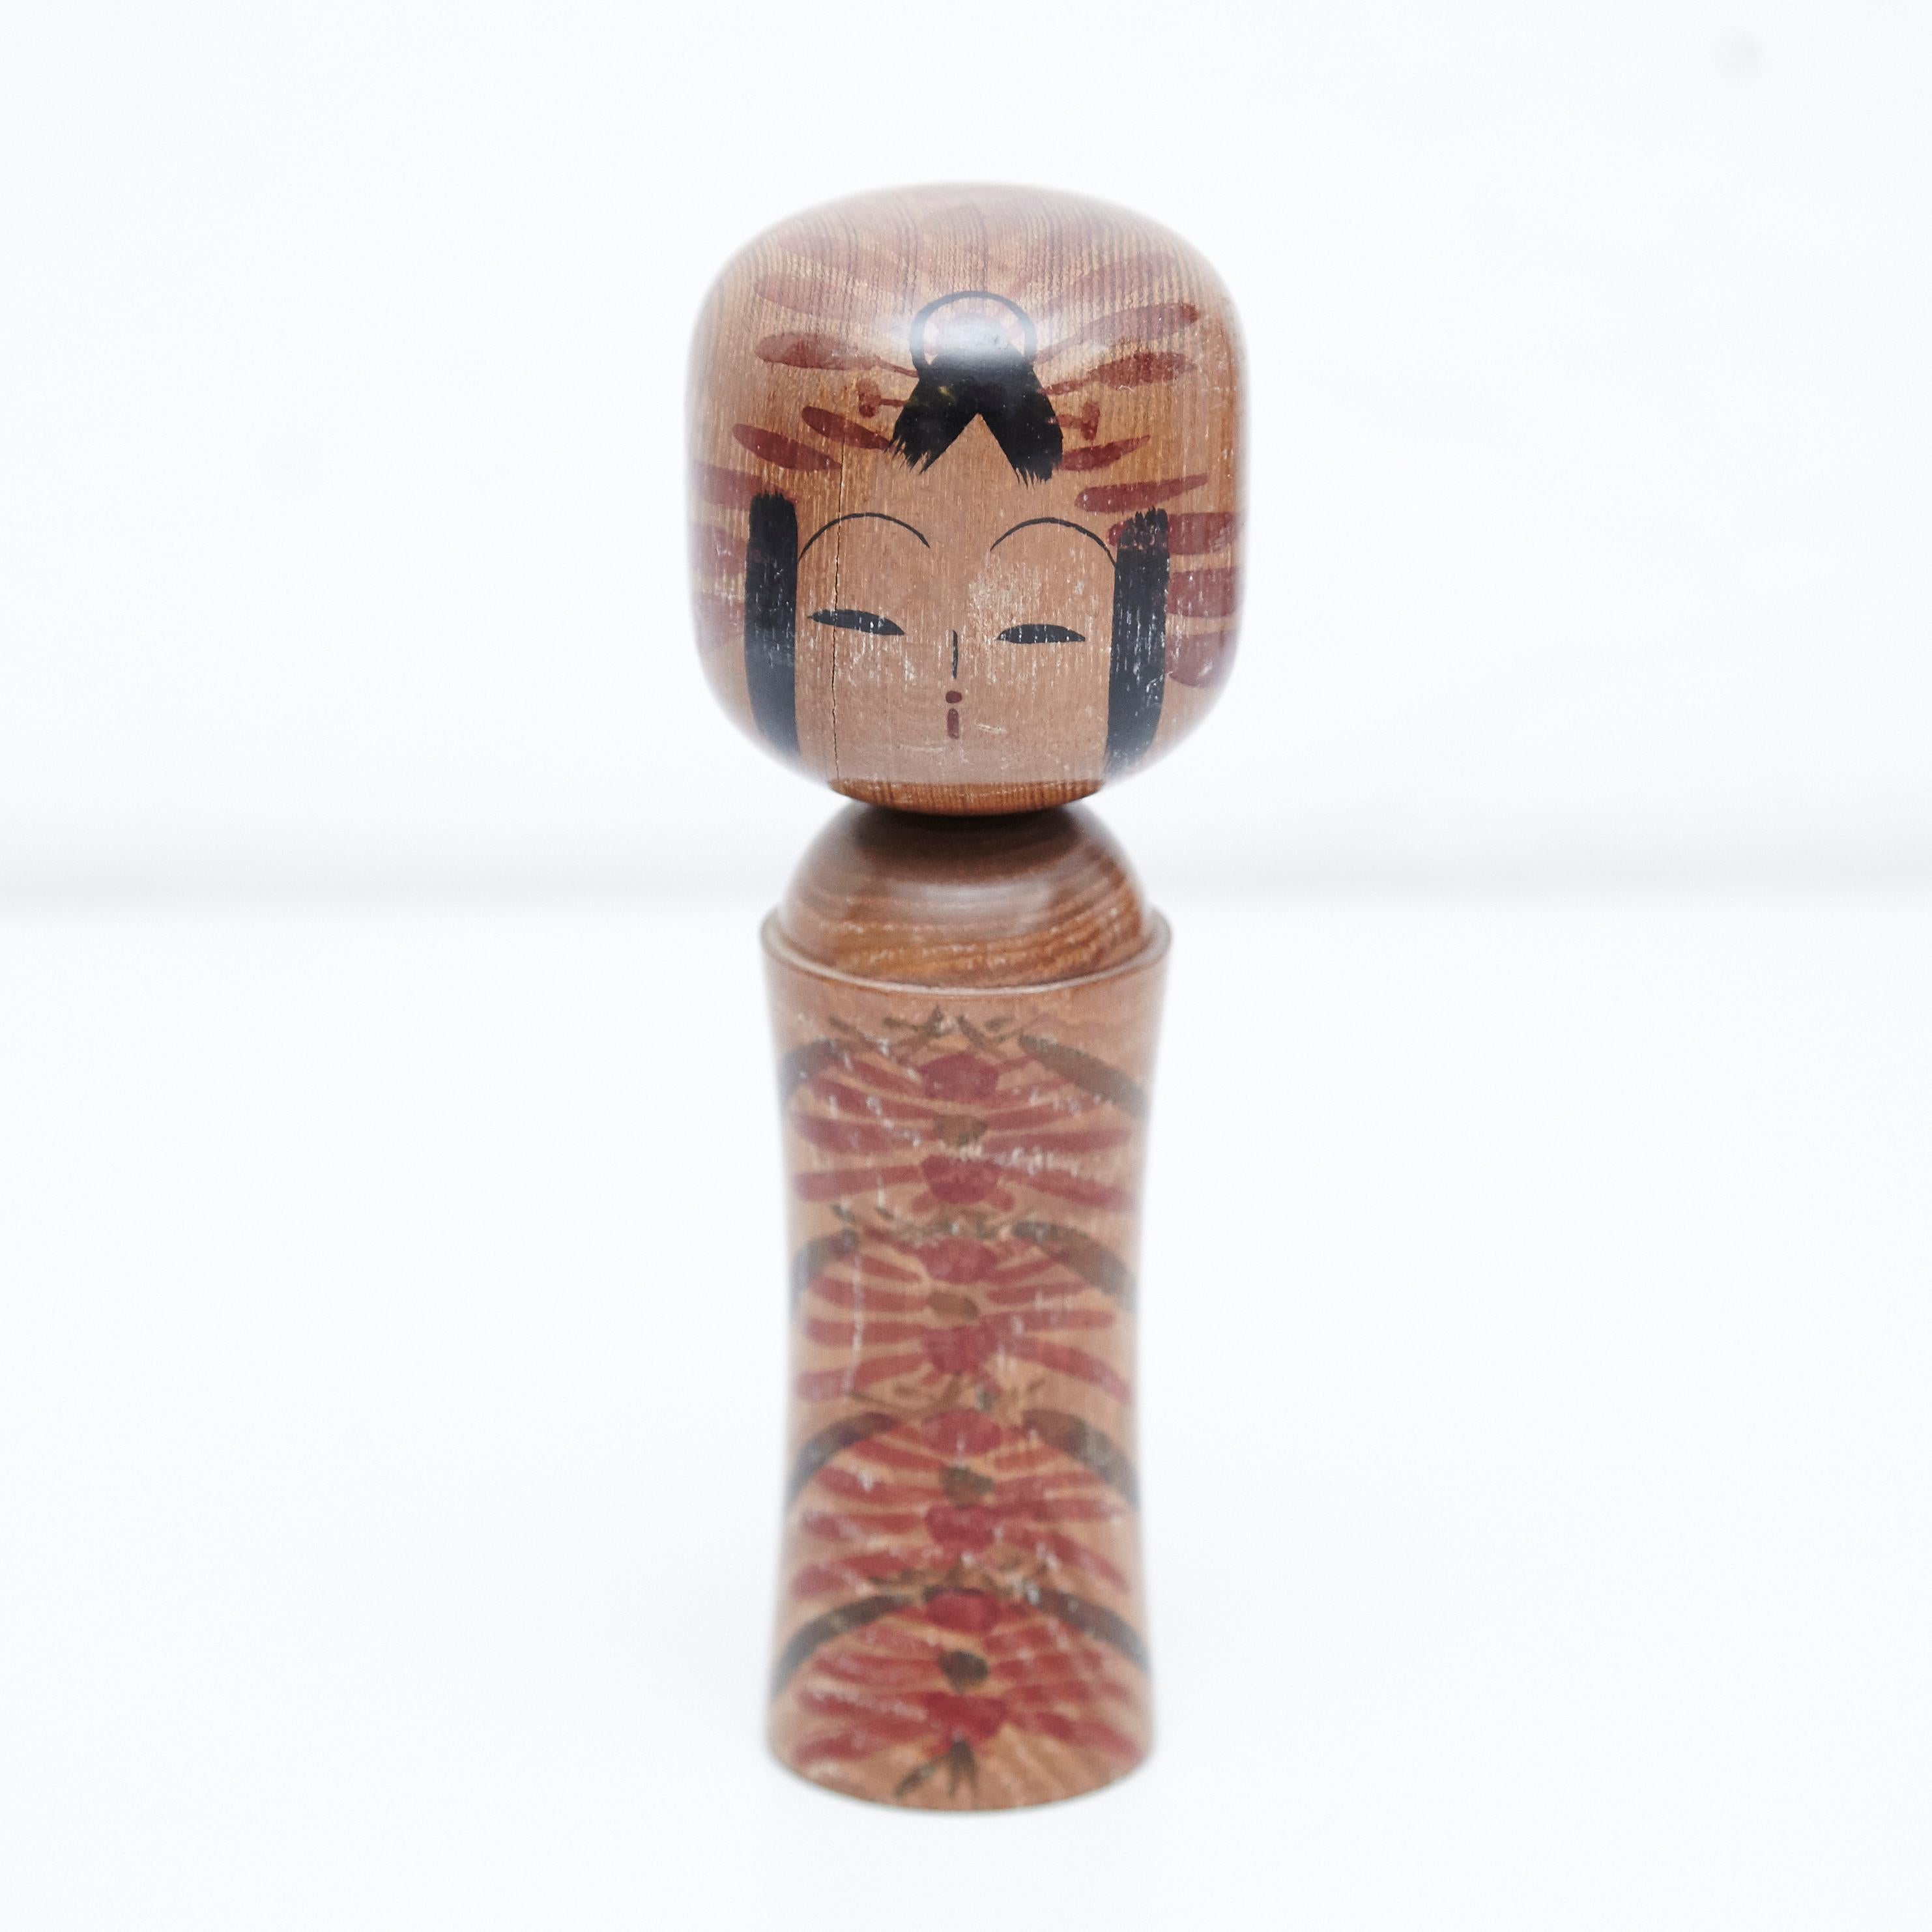 Japanese dolls called Kokeshi of the early 20th century.
Provenance from the northern Japan.
Set of 11.

Measures: 

29 x 10 cm
18 x 3,3 cm
15 x 5 cm
30,5 x 7 cm
16 x 4,5 cm
11 x 4 cm
37 x 9,5 cm
24 x 7,5 cm
17 x 5,5 cm
15 x 5